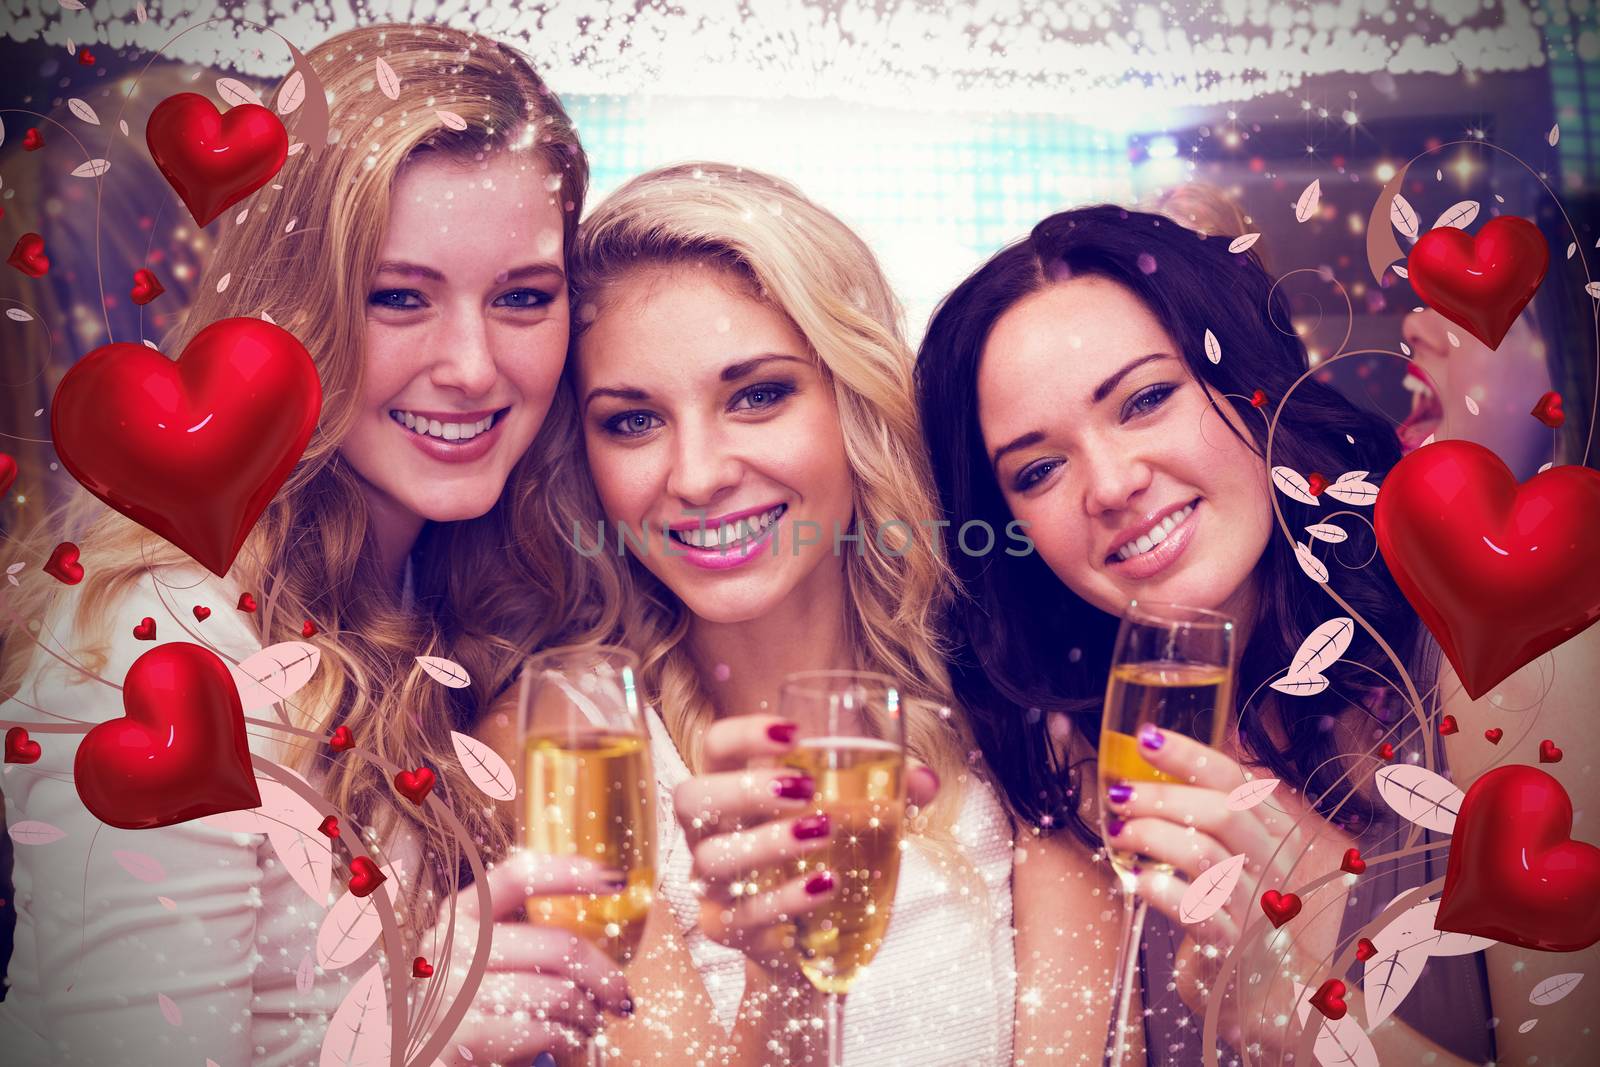 Pretty friends drinking champagne together against valentines heart design